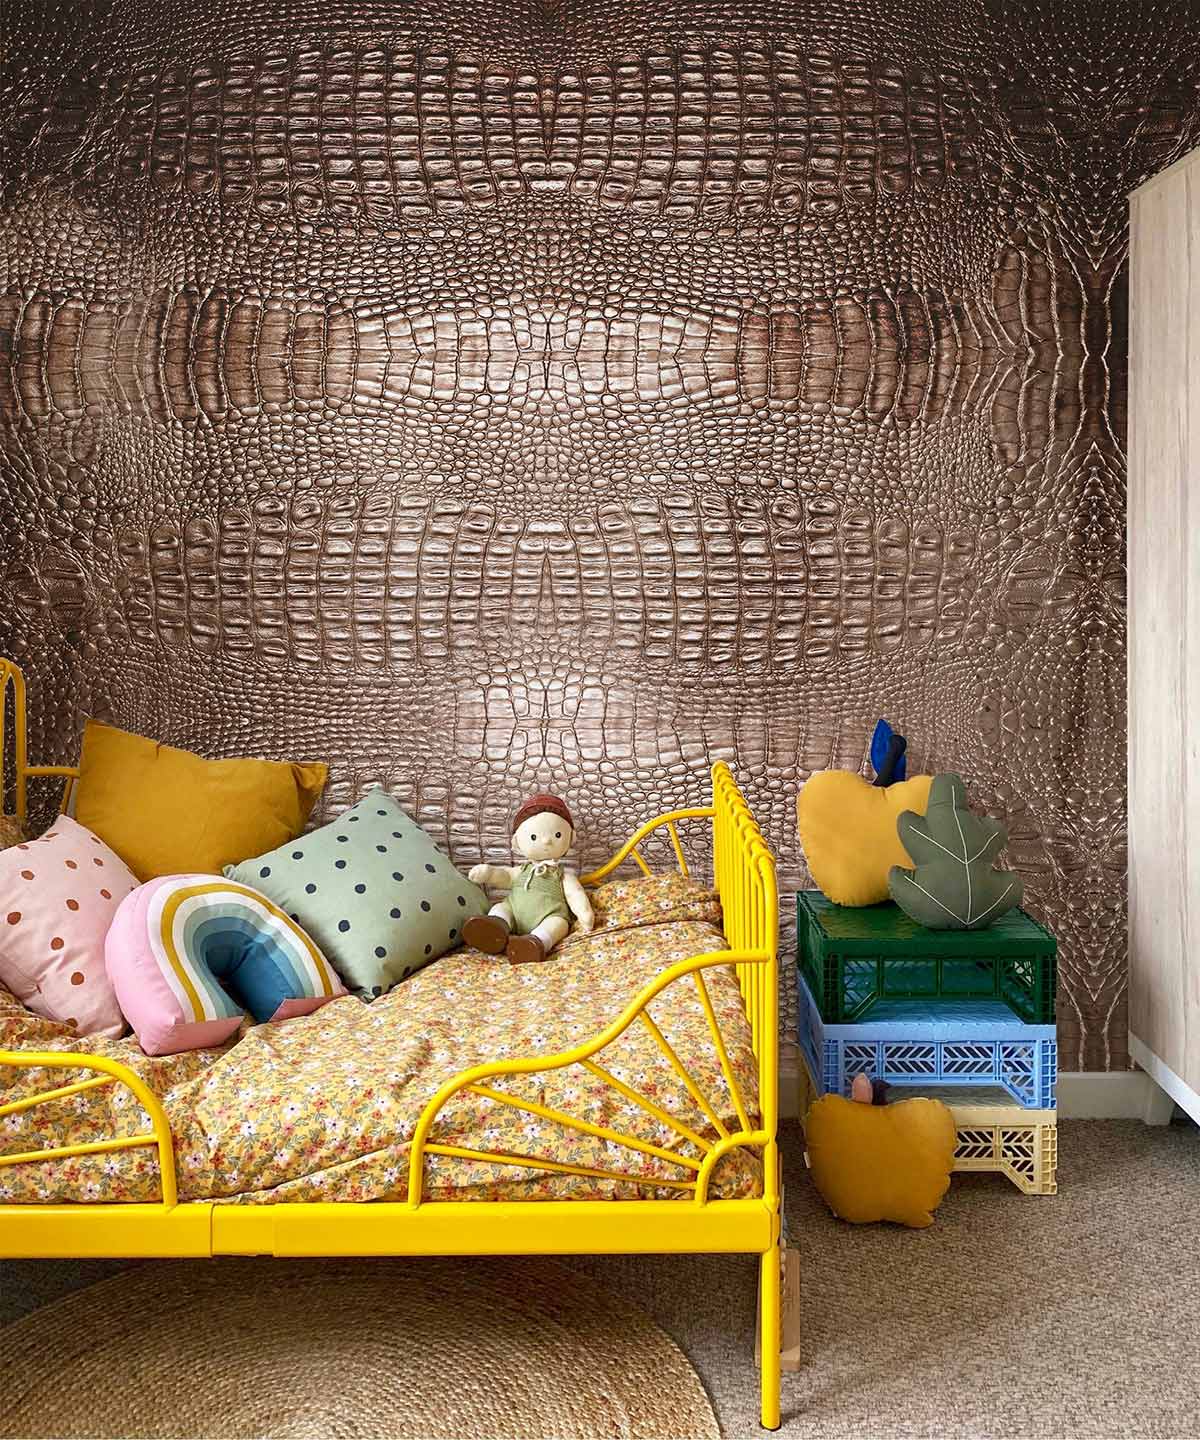 Wallpaper in the Shape of a Brown Python Mural for Use in Children's Rooms